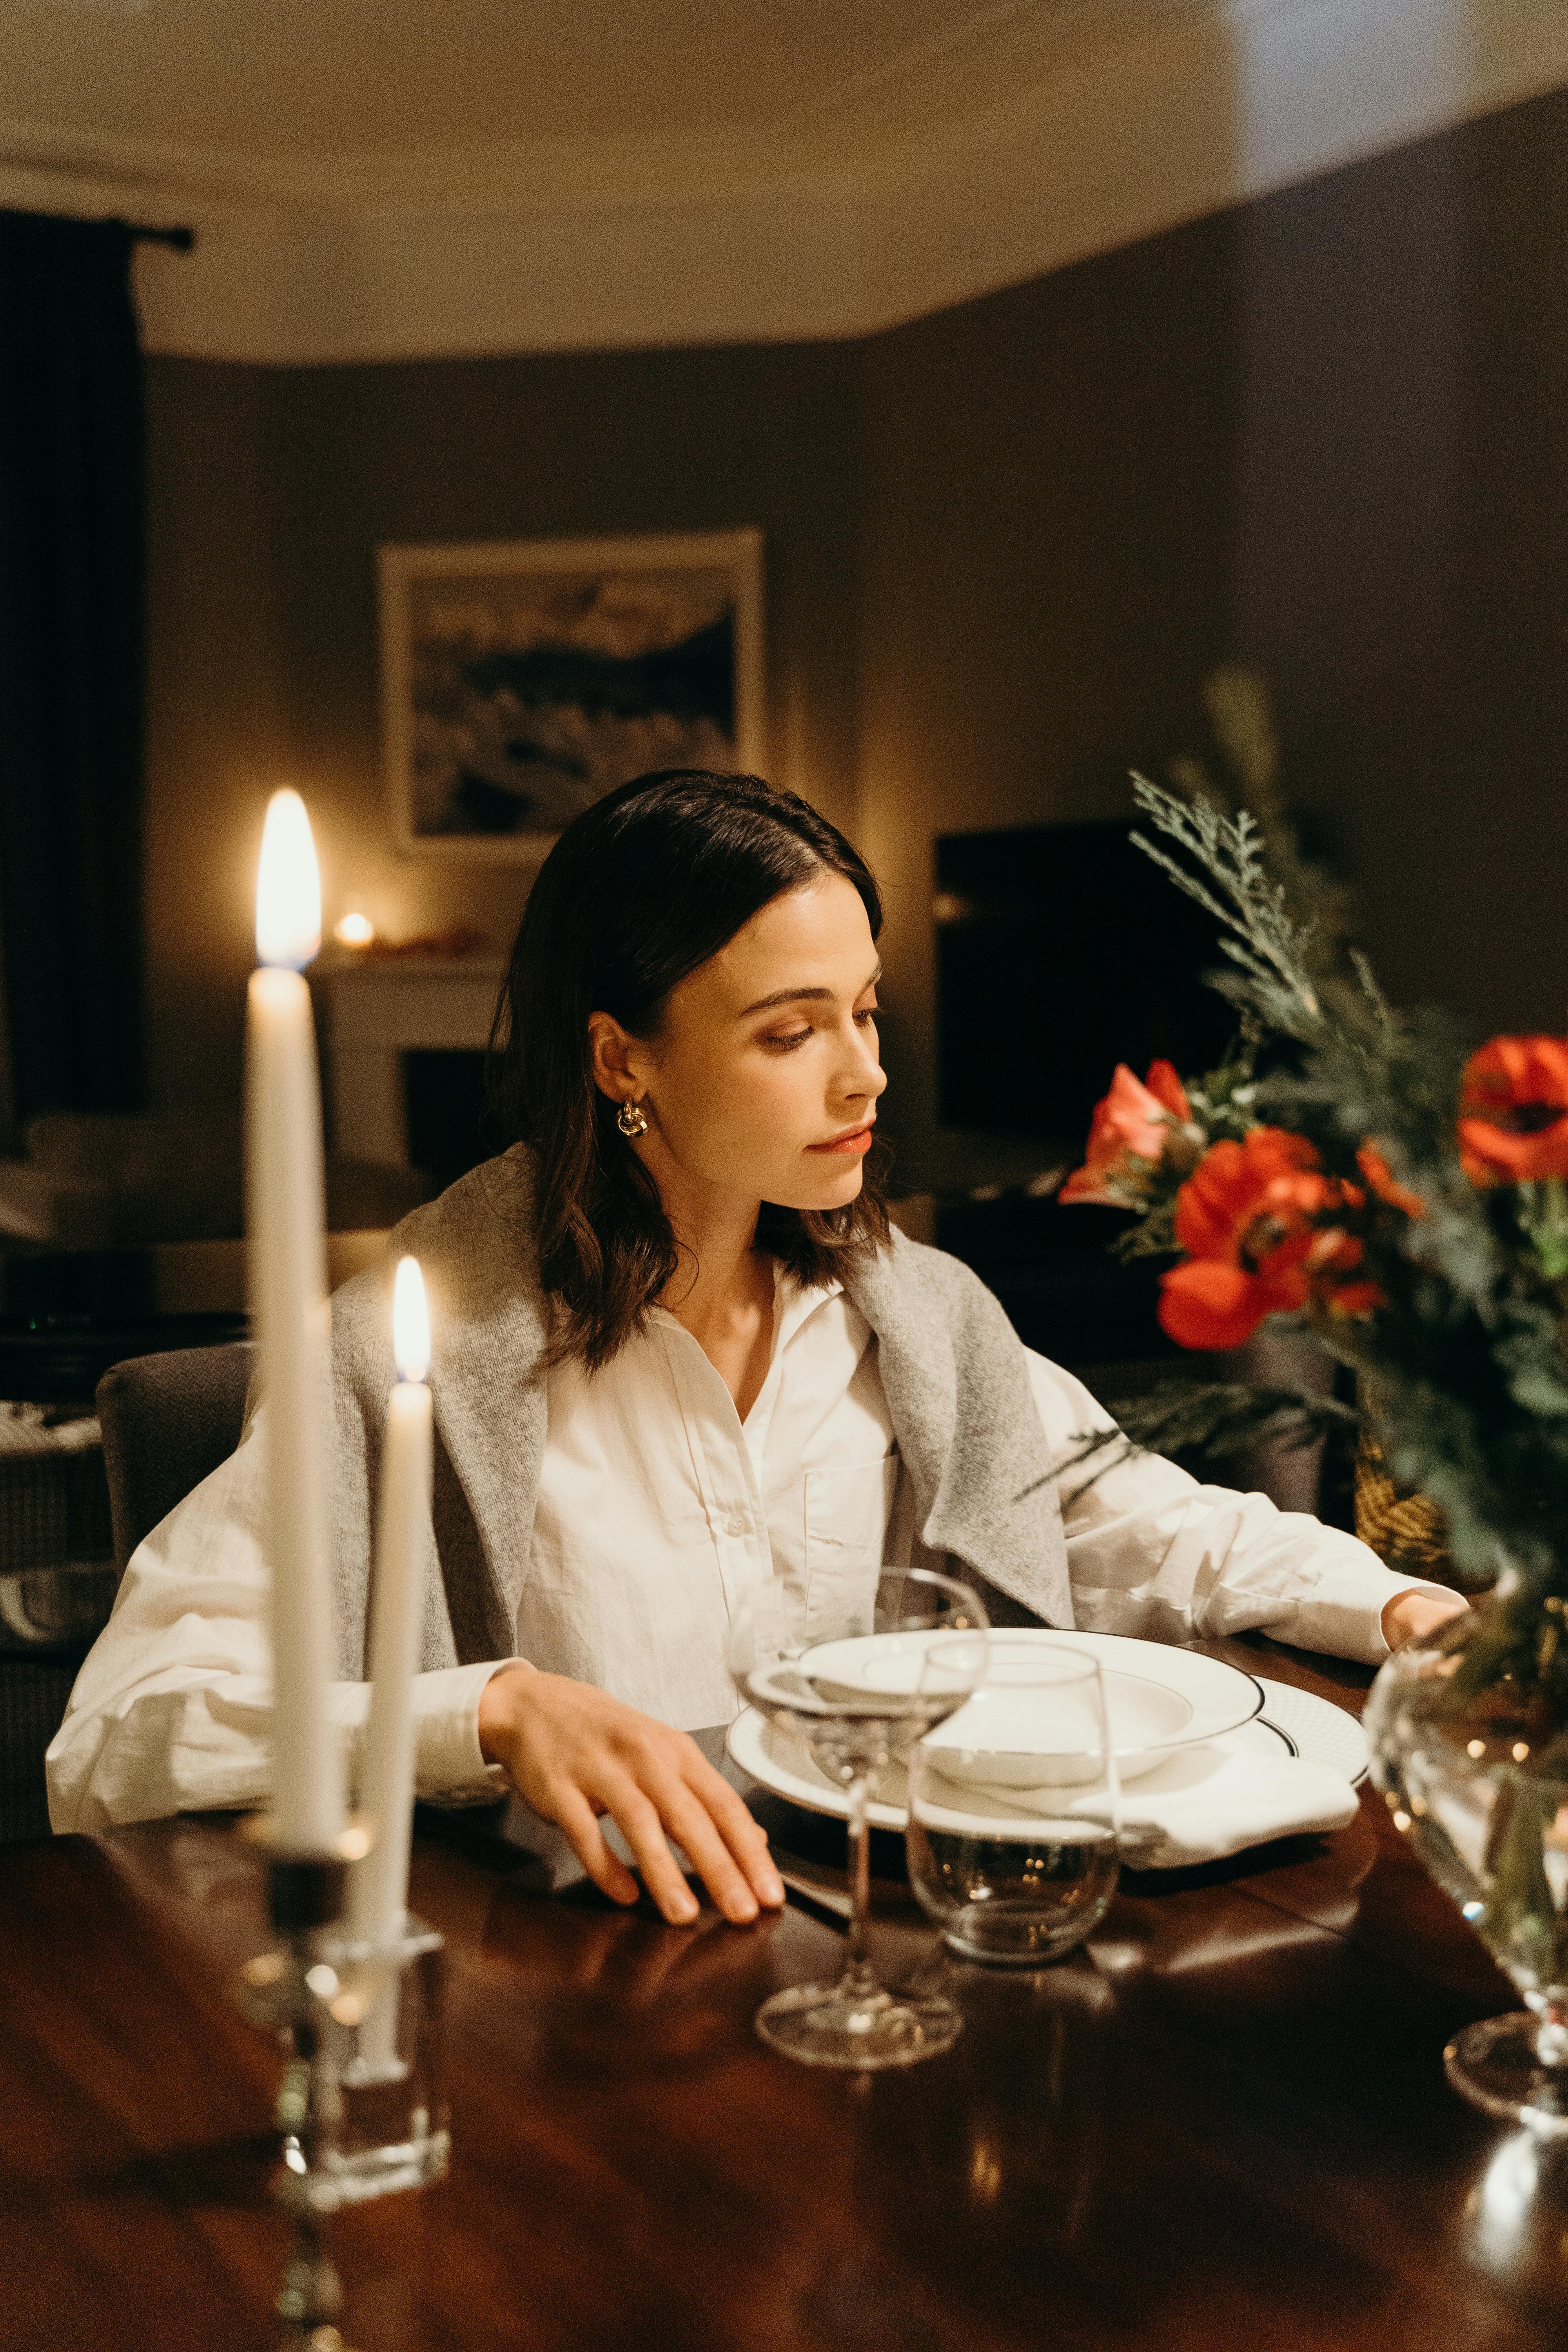 A woman at a dining table | Source: Pexels